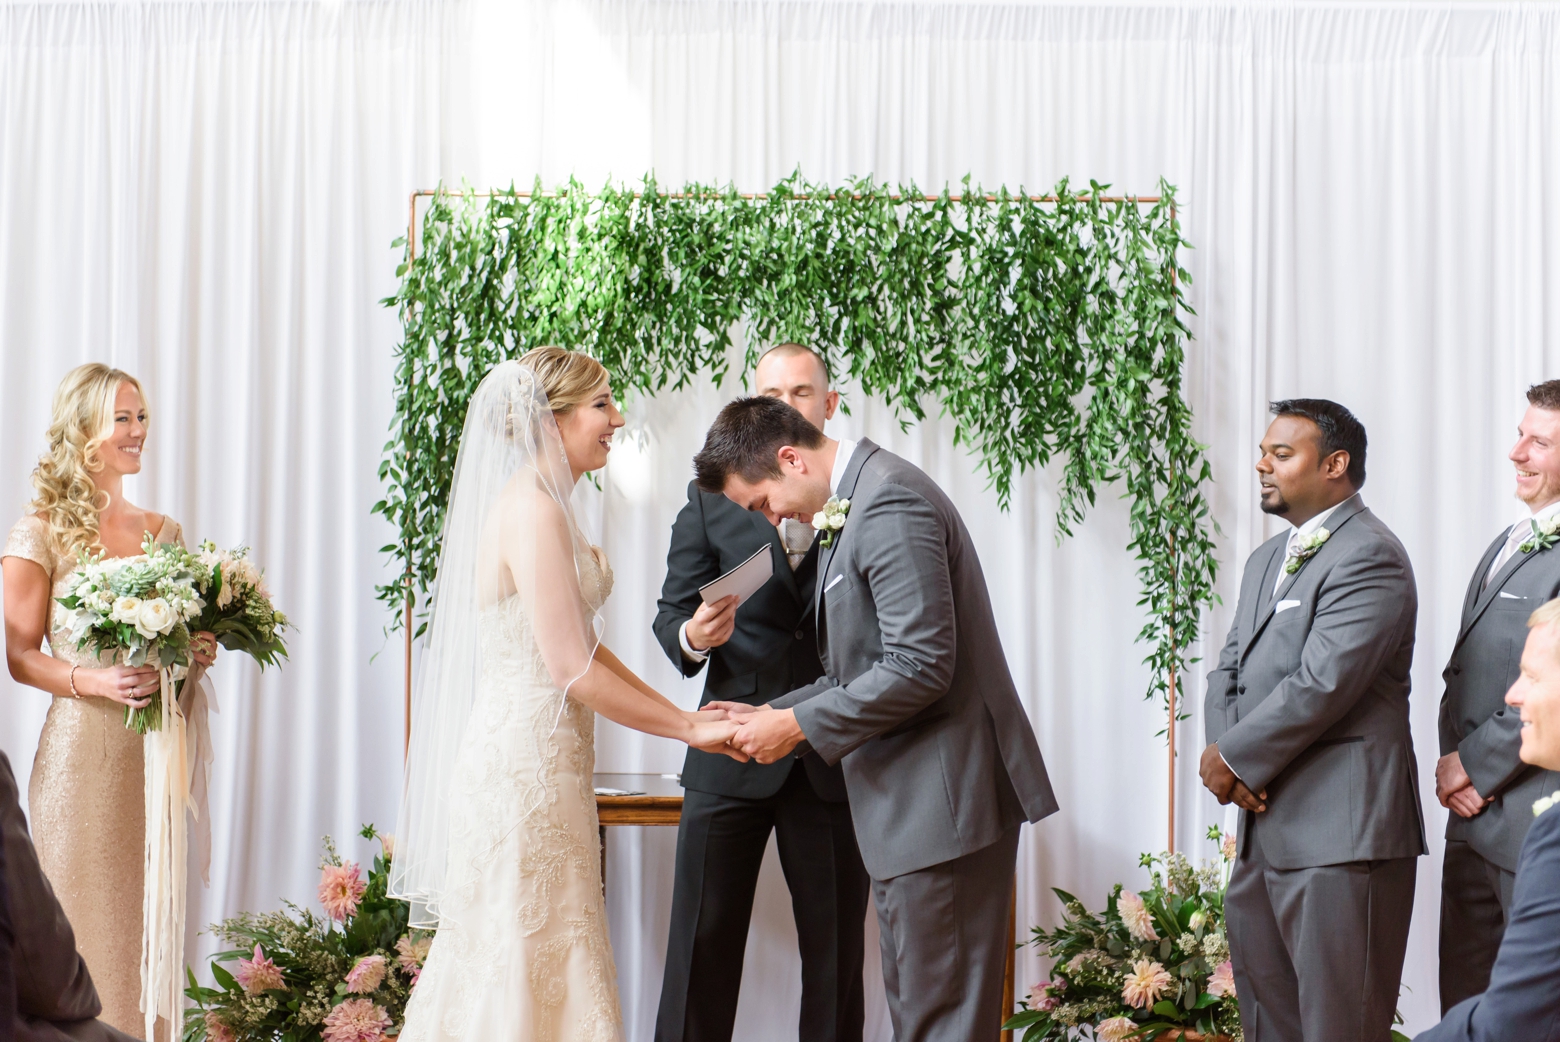 Groom laughs during the ceremony under a greenery arch